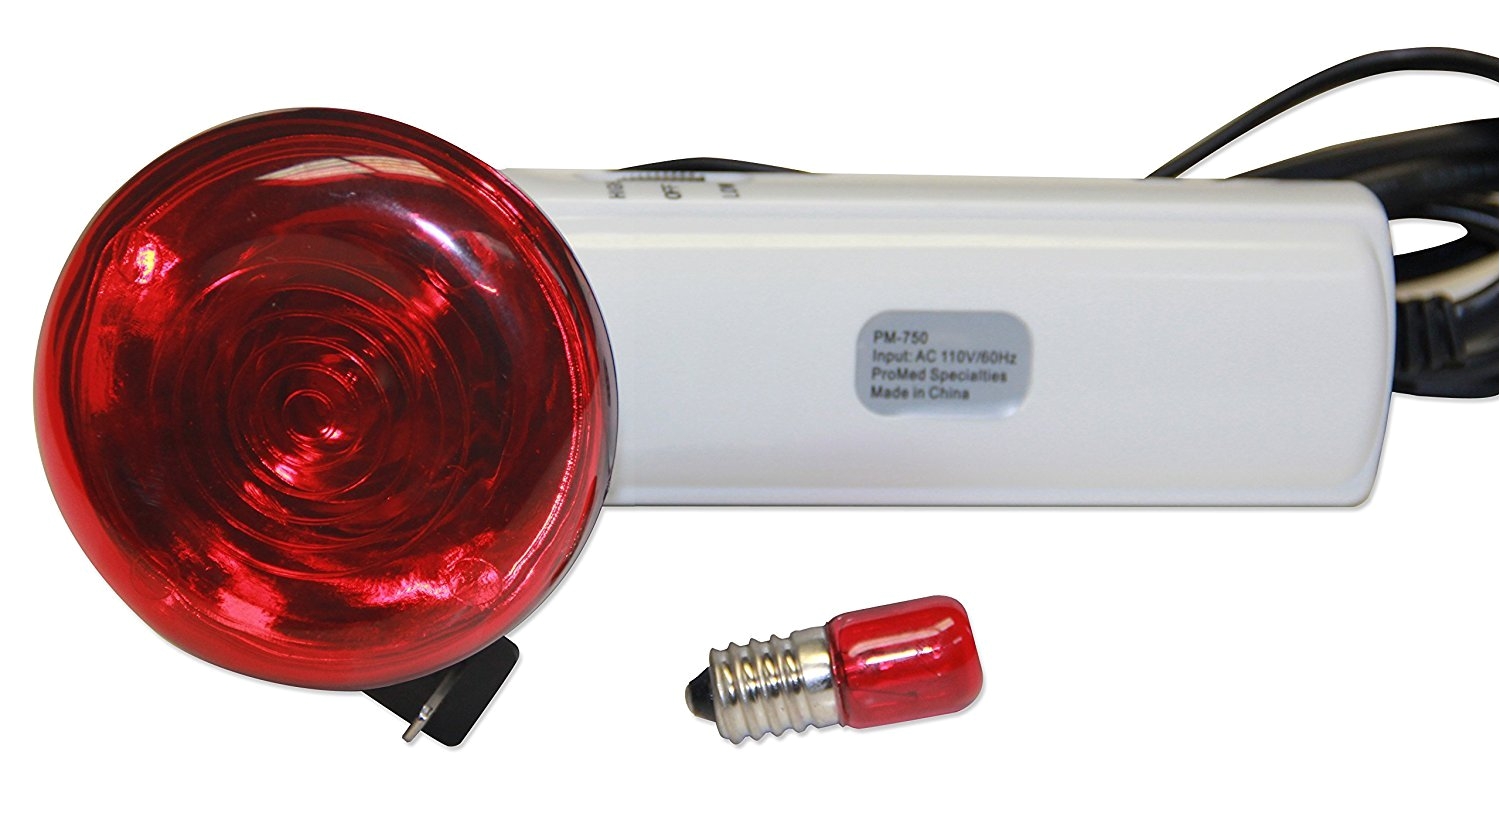 infrared heating device and now stronger new 10w bulb with a extra replacement bulb included